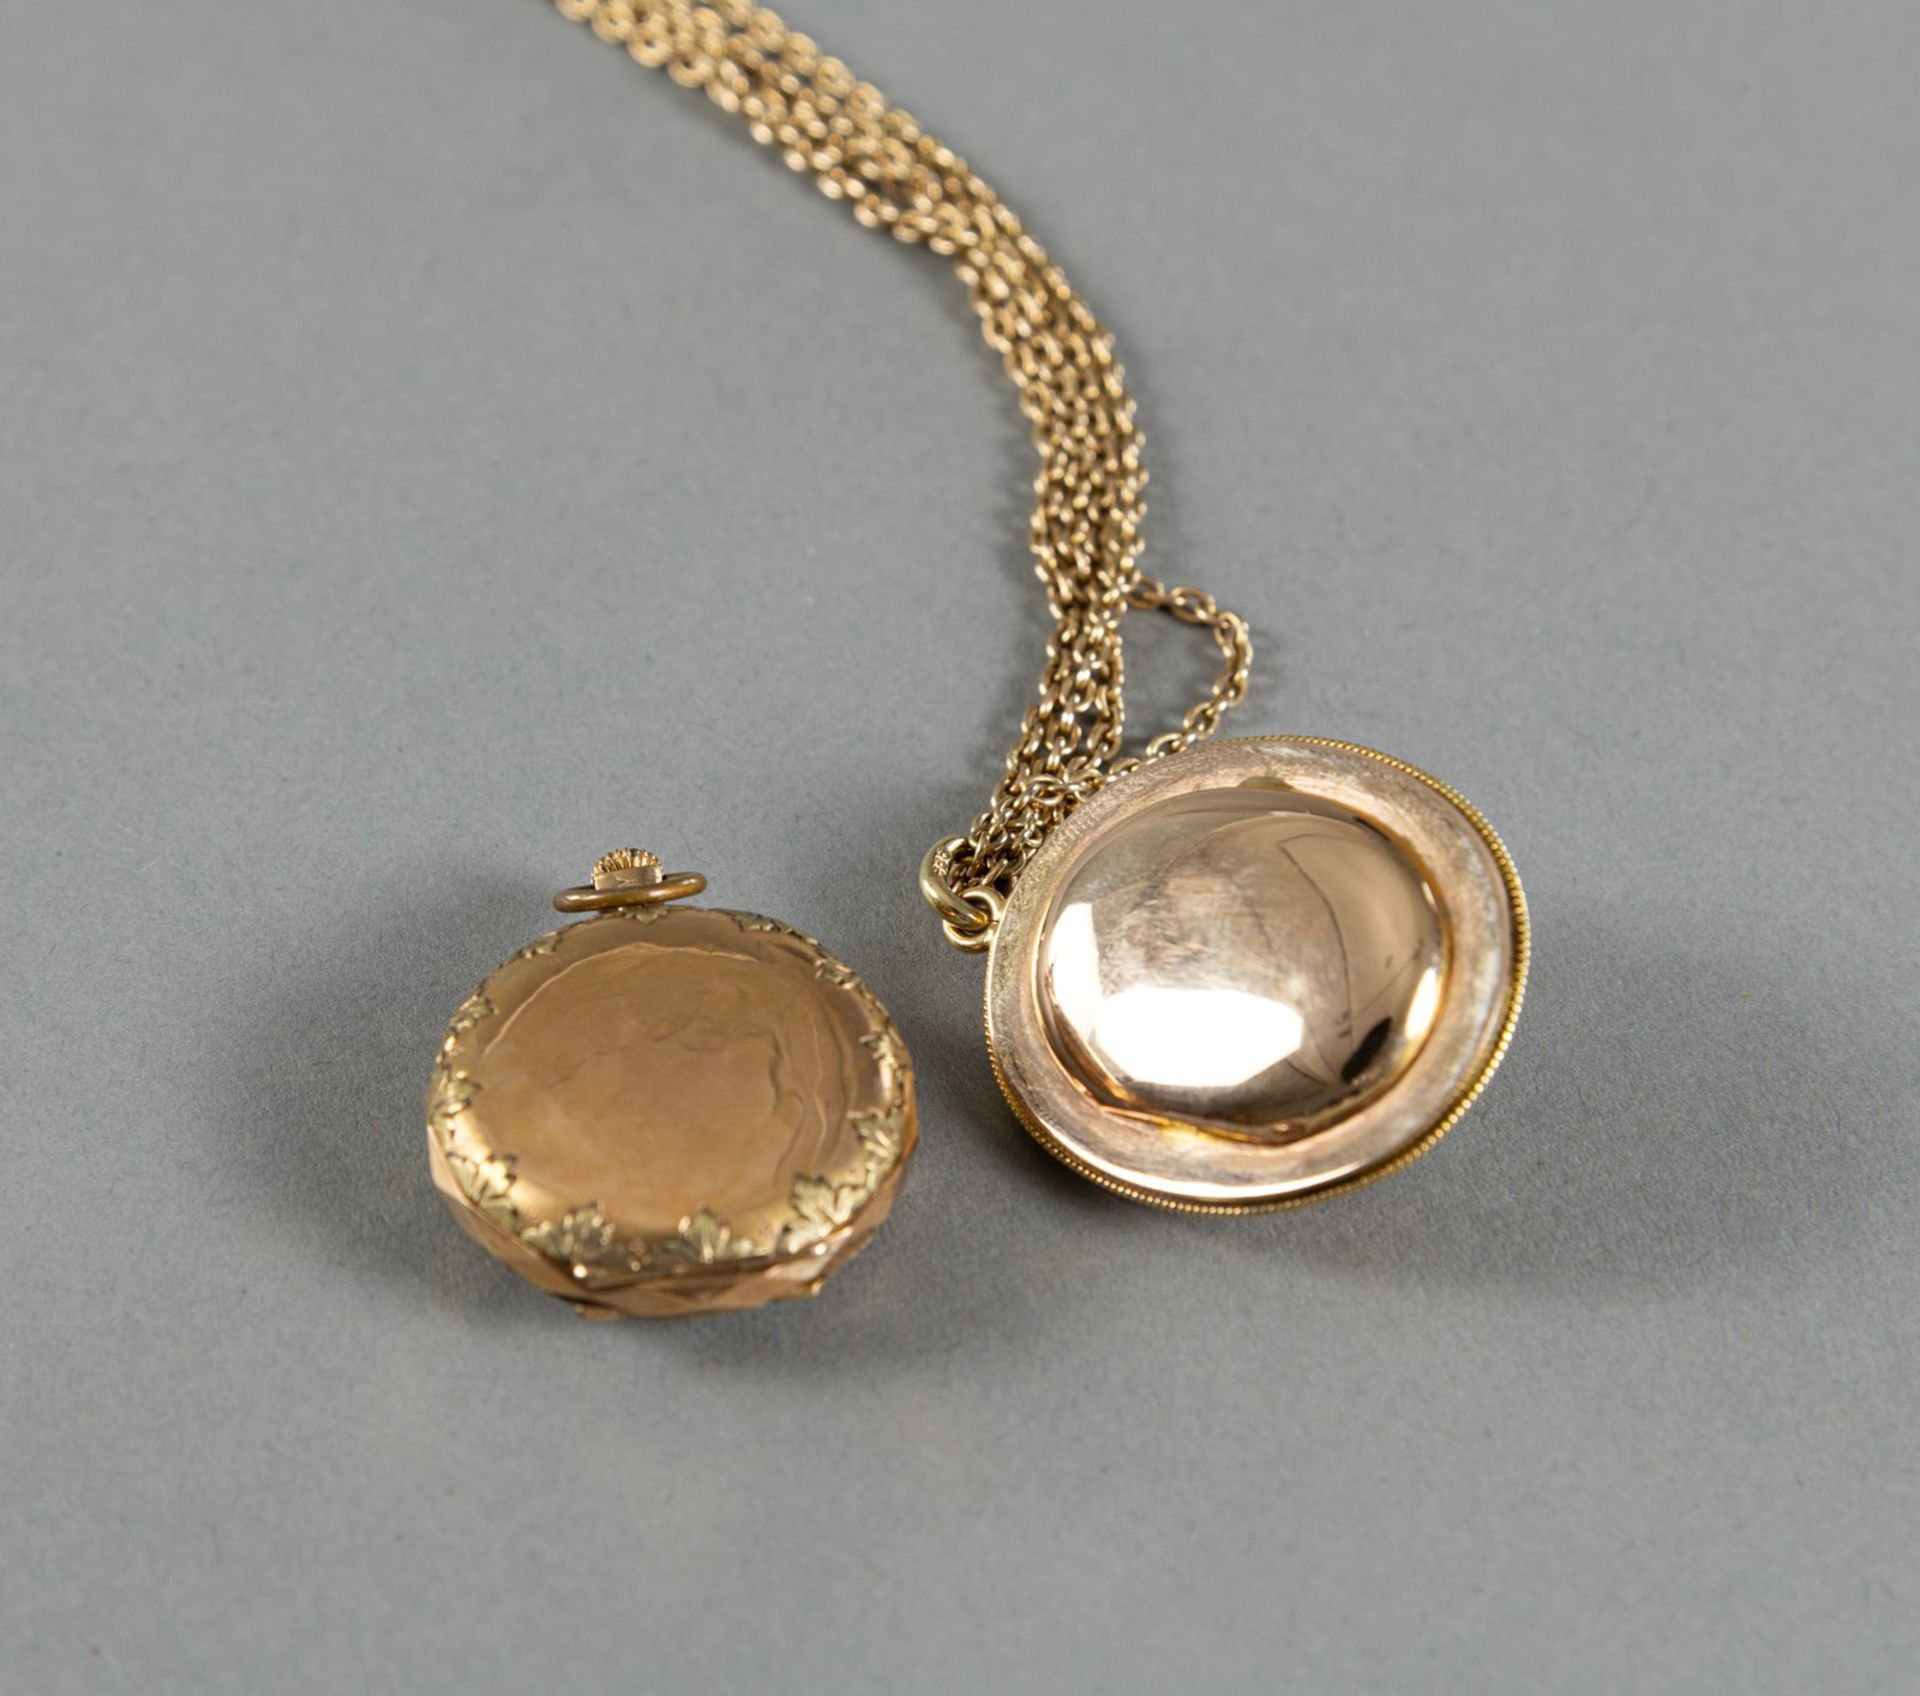 A CAMEO PENDANT WITH NECKLACE AND A LADY'S POCKET WATCH - Image 5 of 5